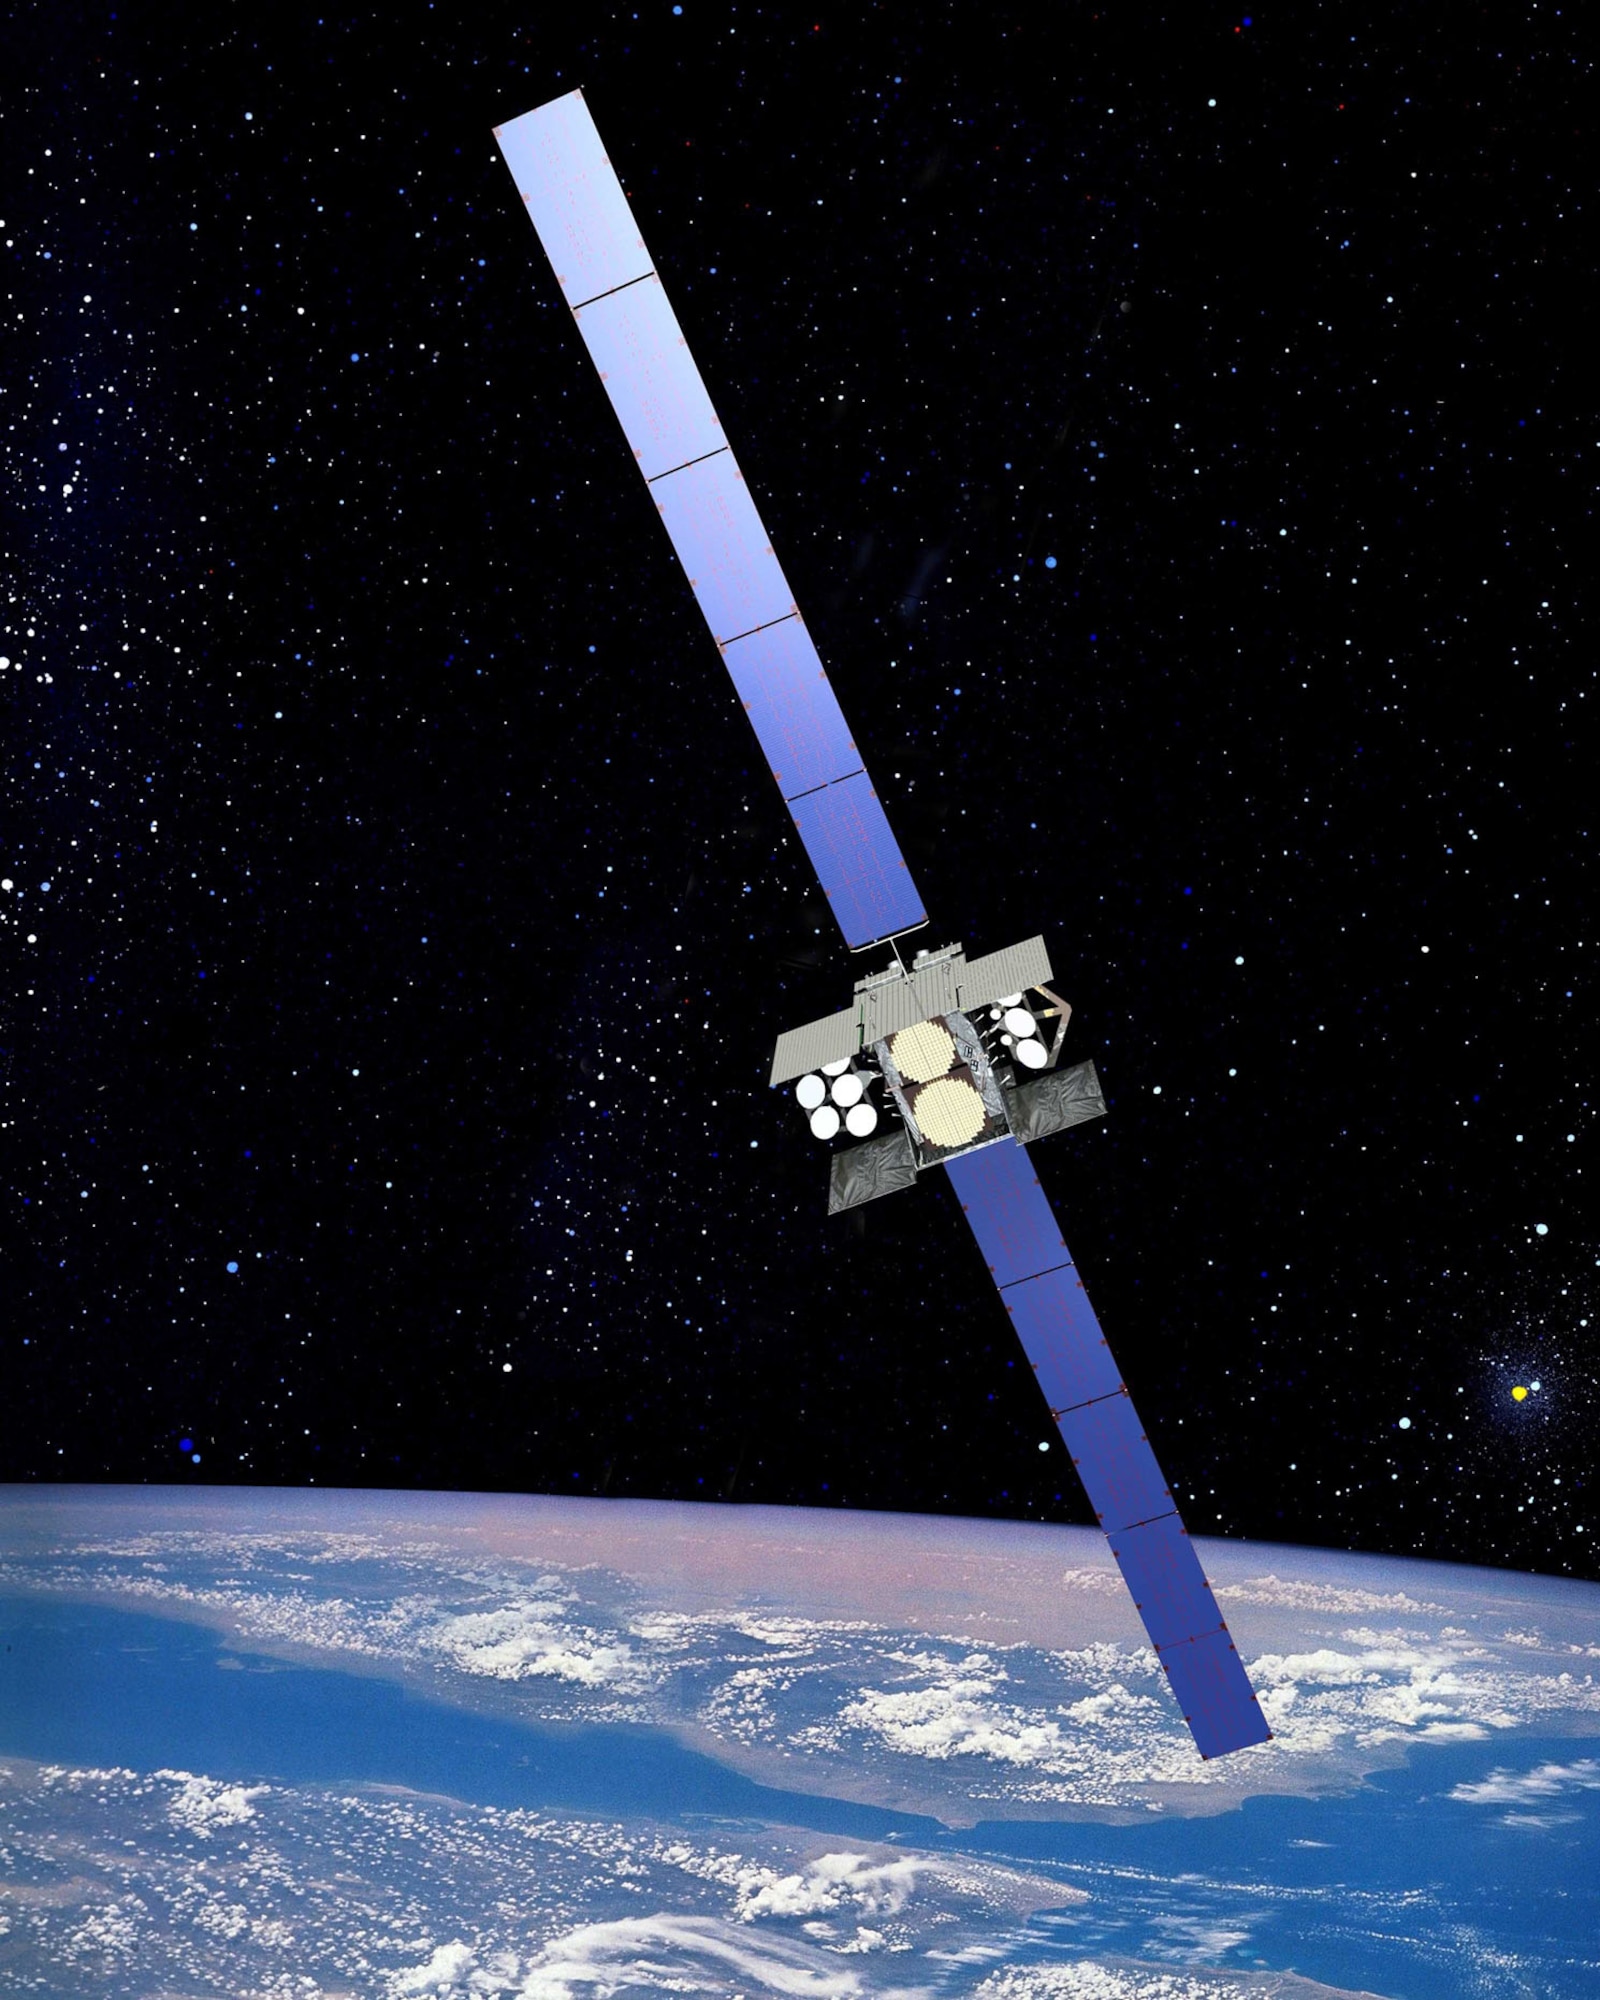 SCHRIEVER AIR FORCE BASE, Colo. -- An artist's rendering of a Wideband Global Satcom satellite. The 3rd Space Operations Squadron has been testing a satellite situational awareness tool known as Blue Force Status for the past two years using data collected from WGS satellites. (courtesy graphic)